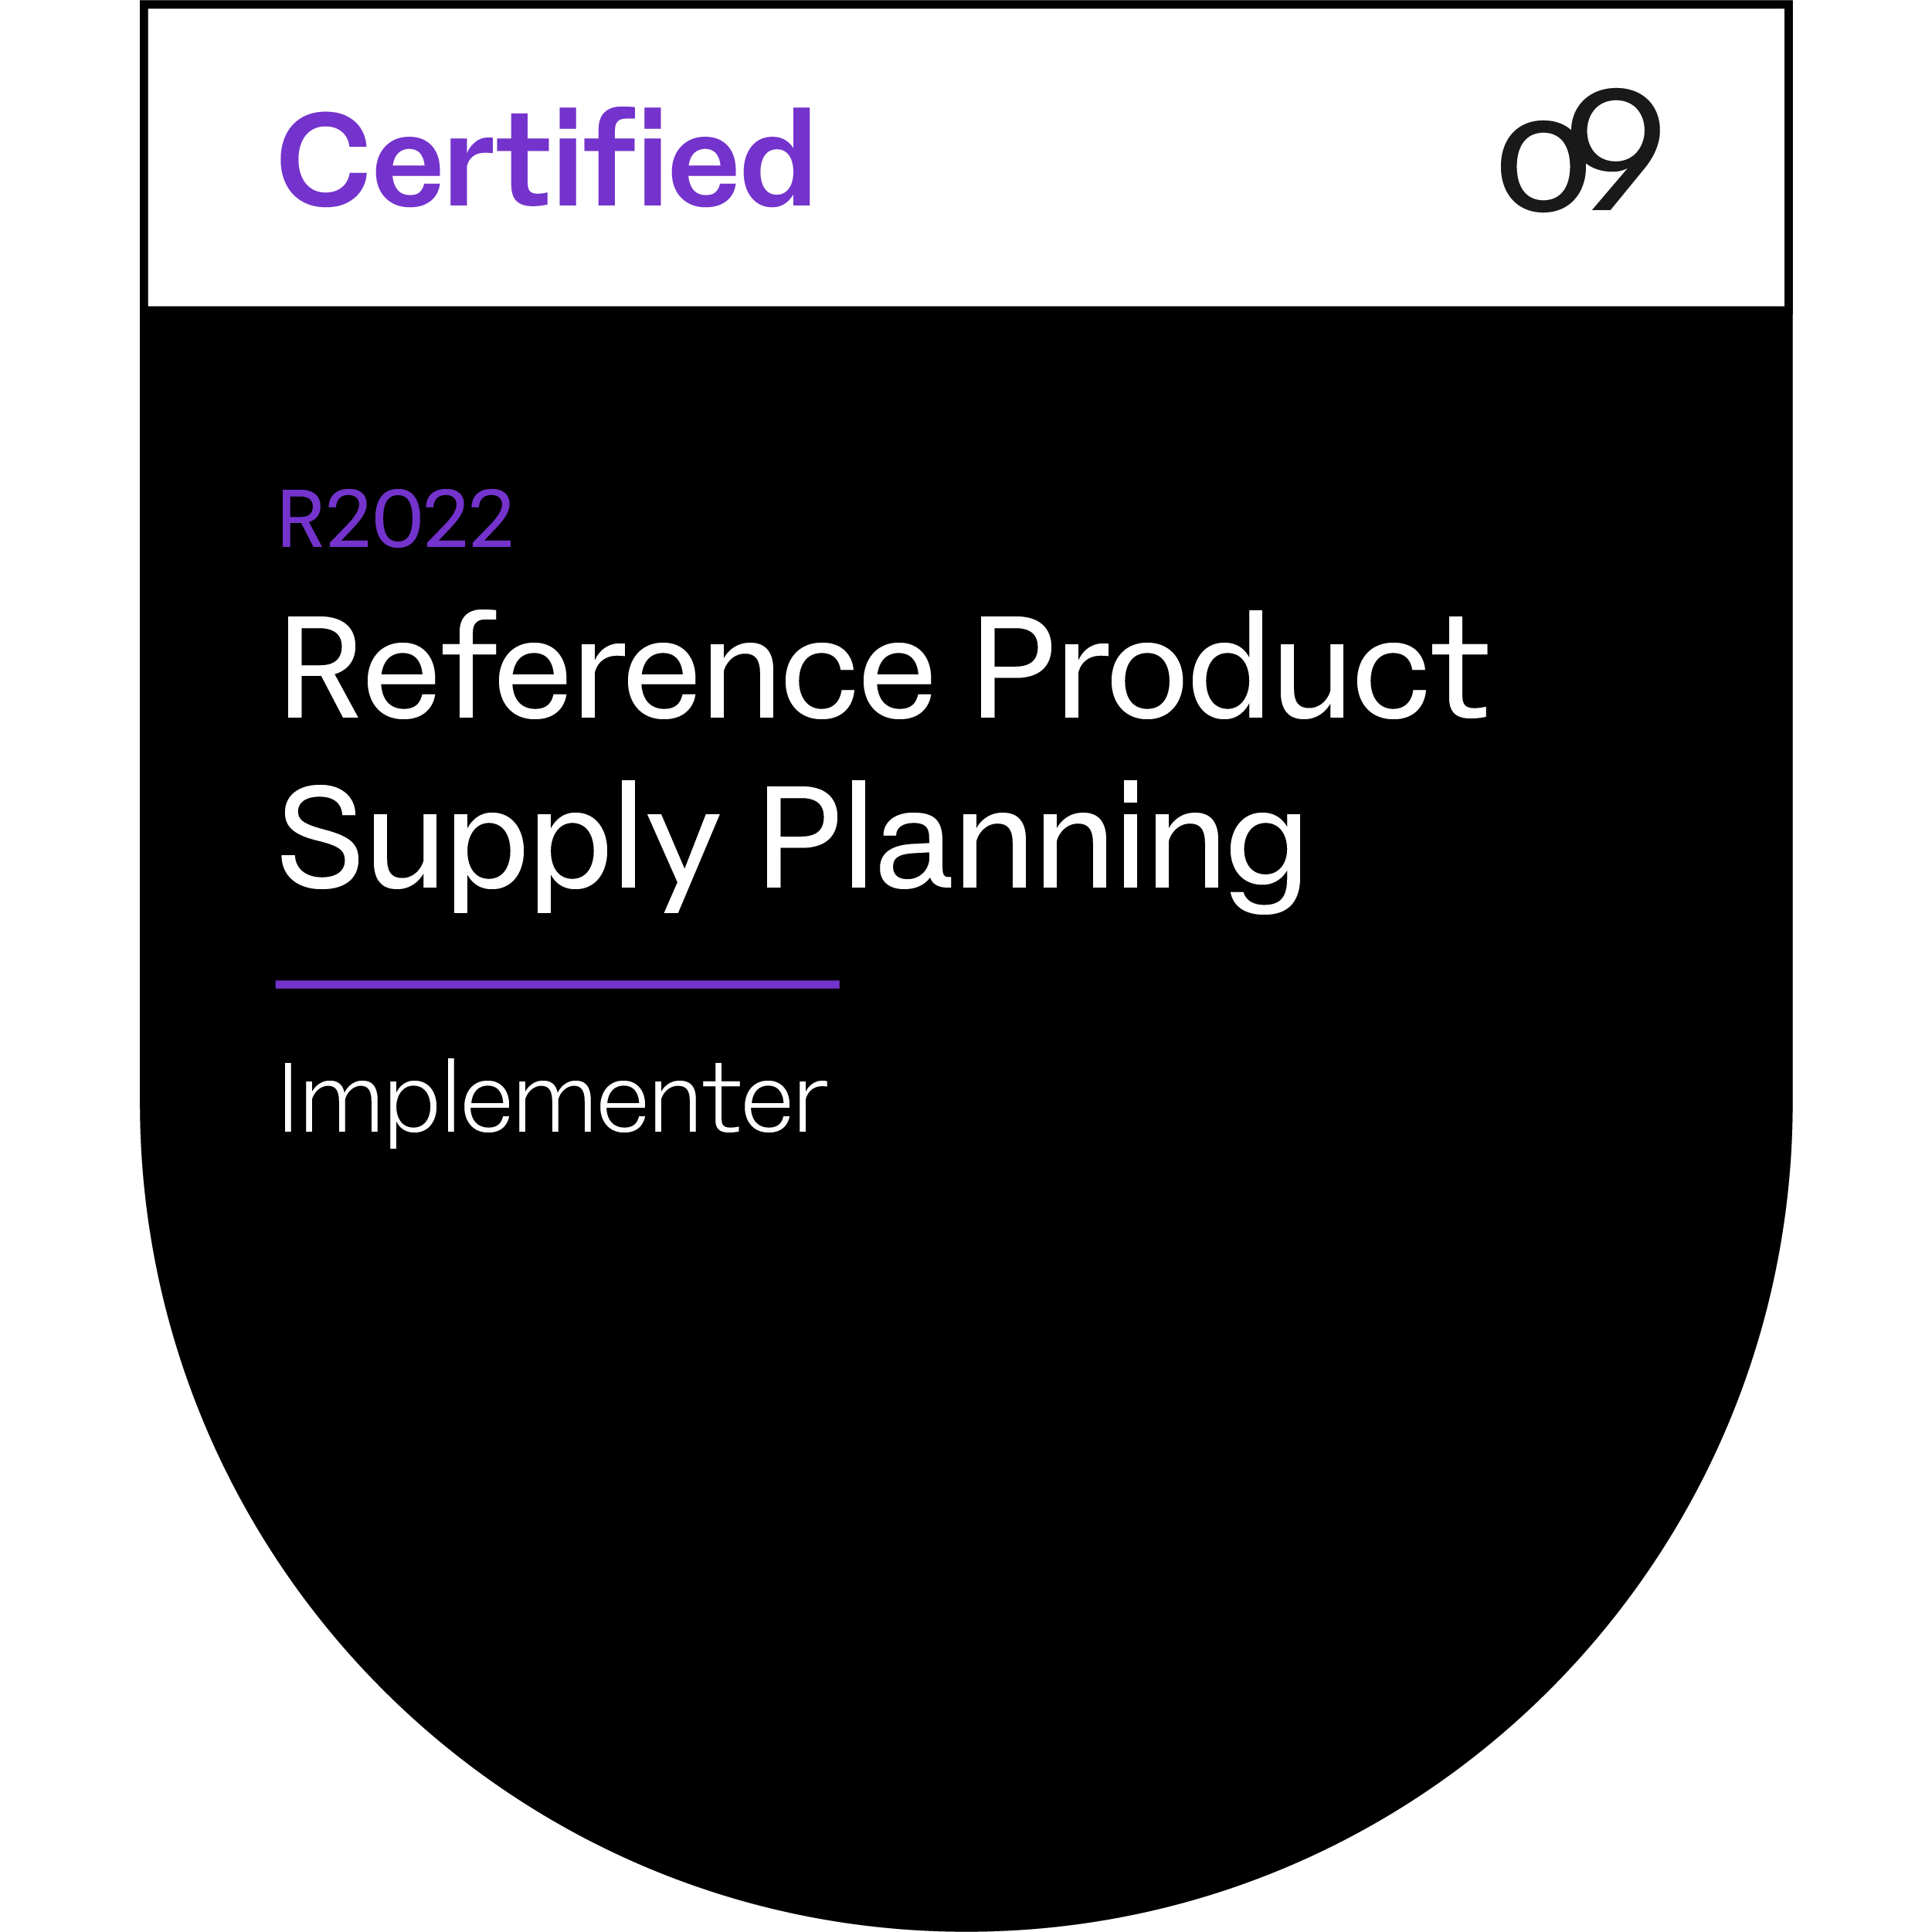 R2022 reference product supply planning implementer badge